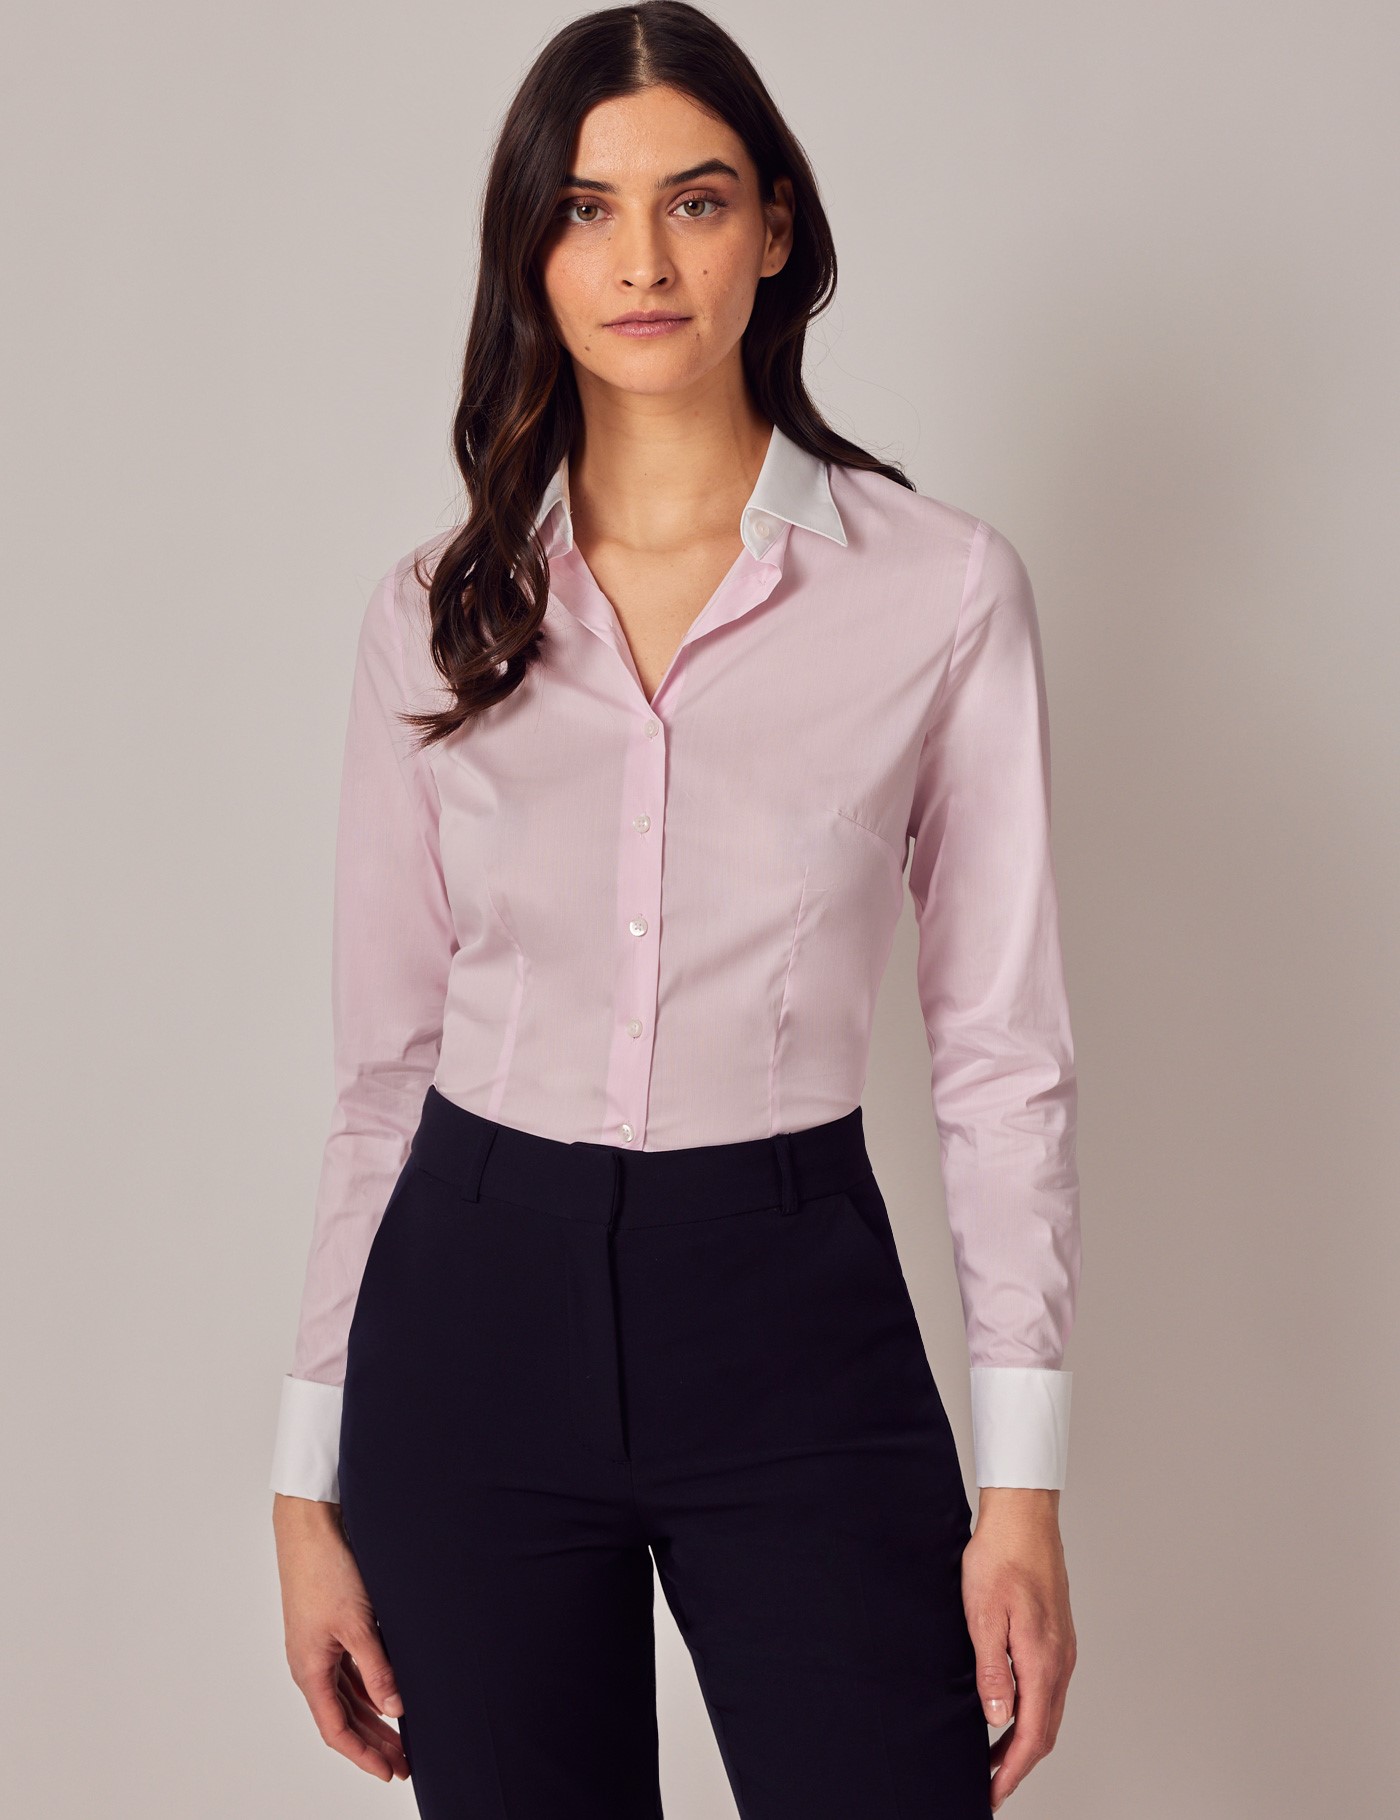 Women's Light Pink Fitted Luxury Cotton Nylon Shirt With White Collar &  Double Cuffs | Hawes & Curtis